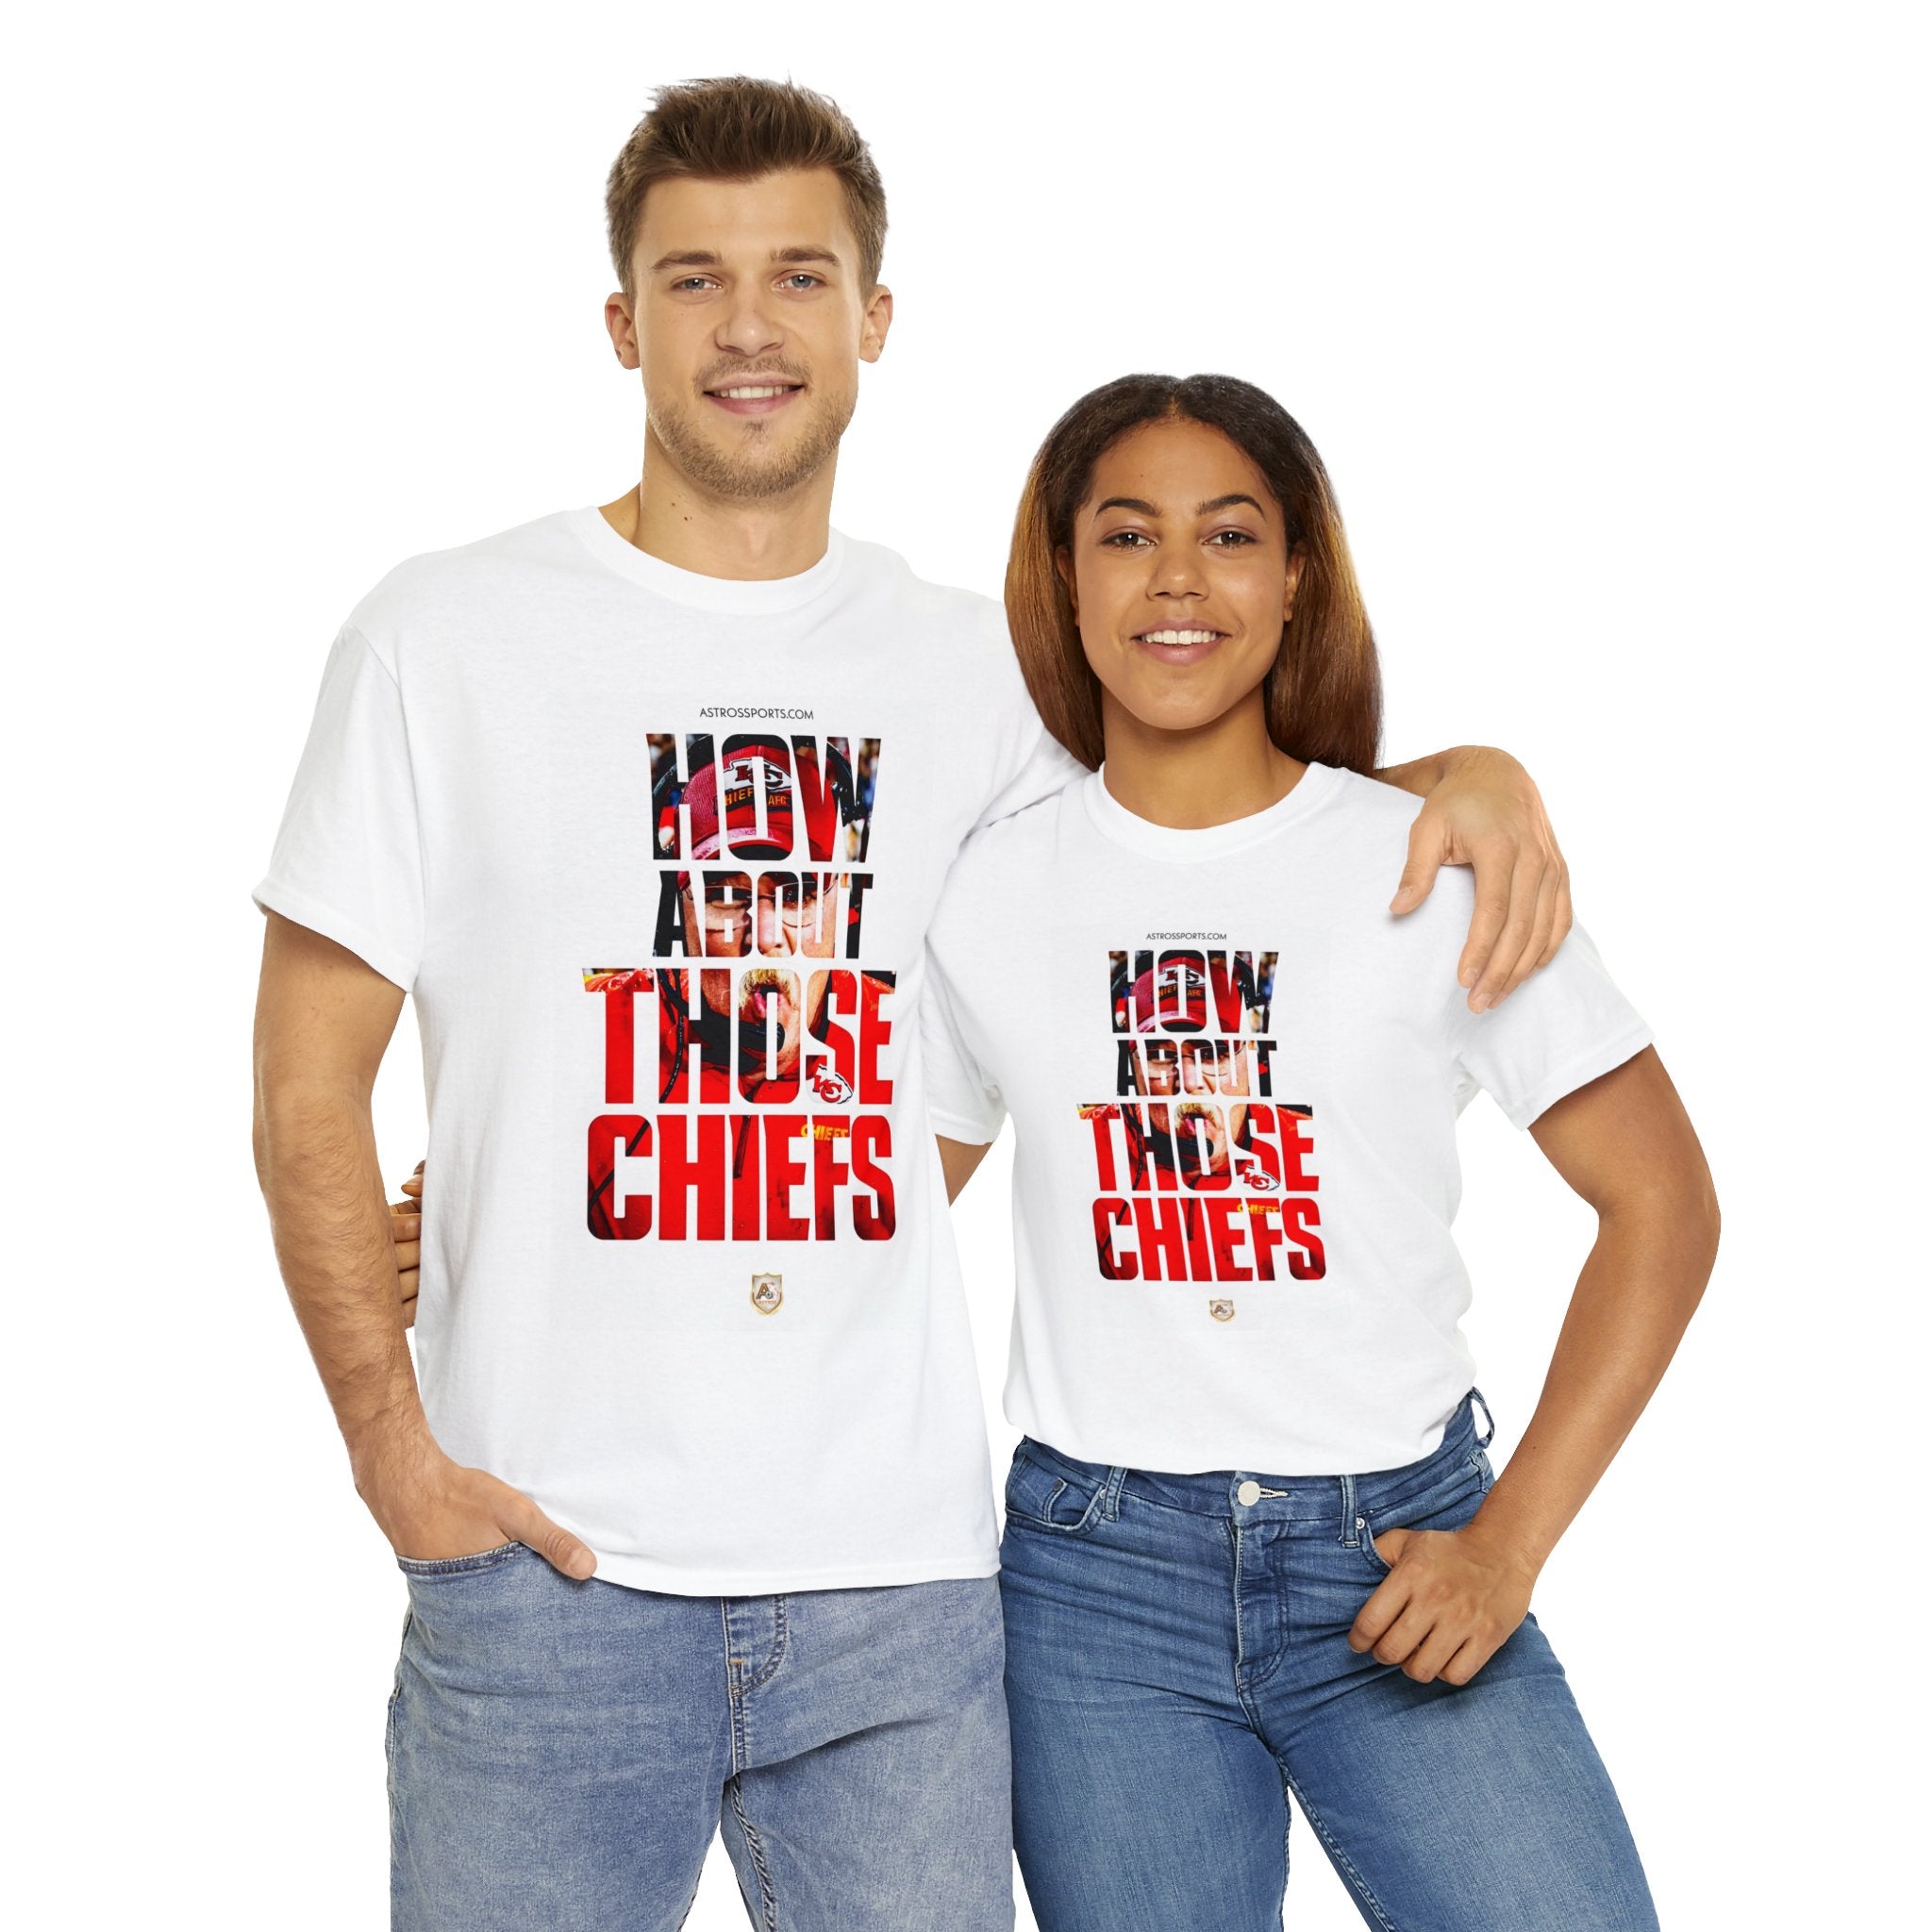 Jersey ''How about those chiefs''